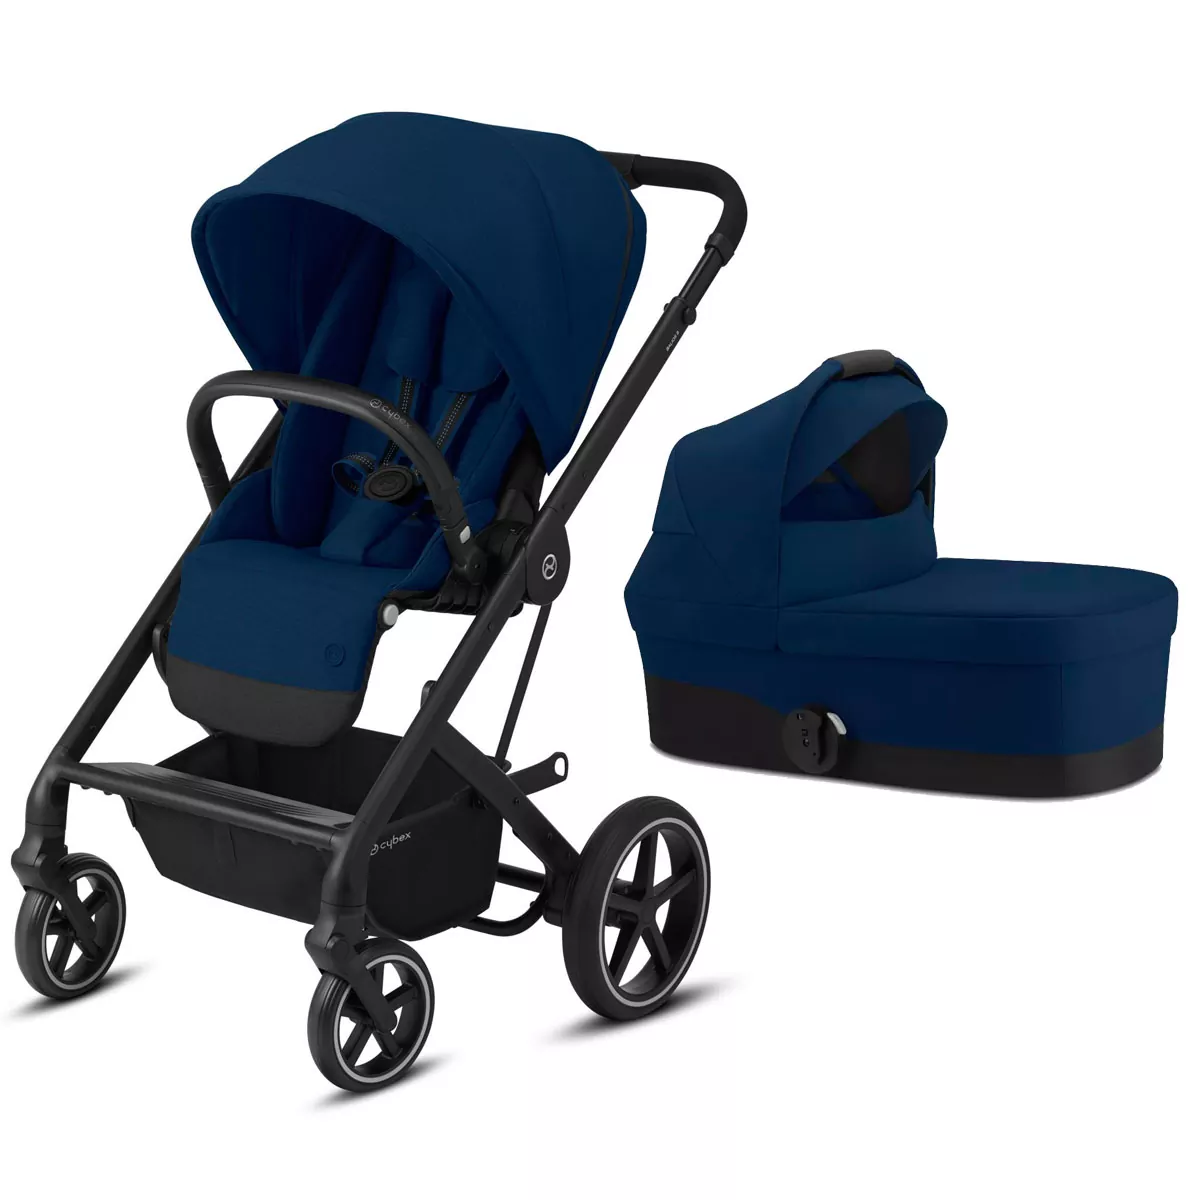 Duo Cybex Balios S lux chasis BLACK Navy Blue